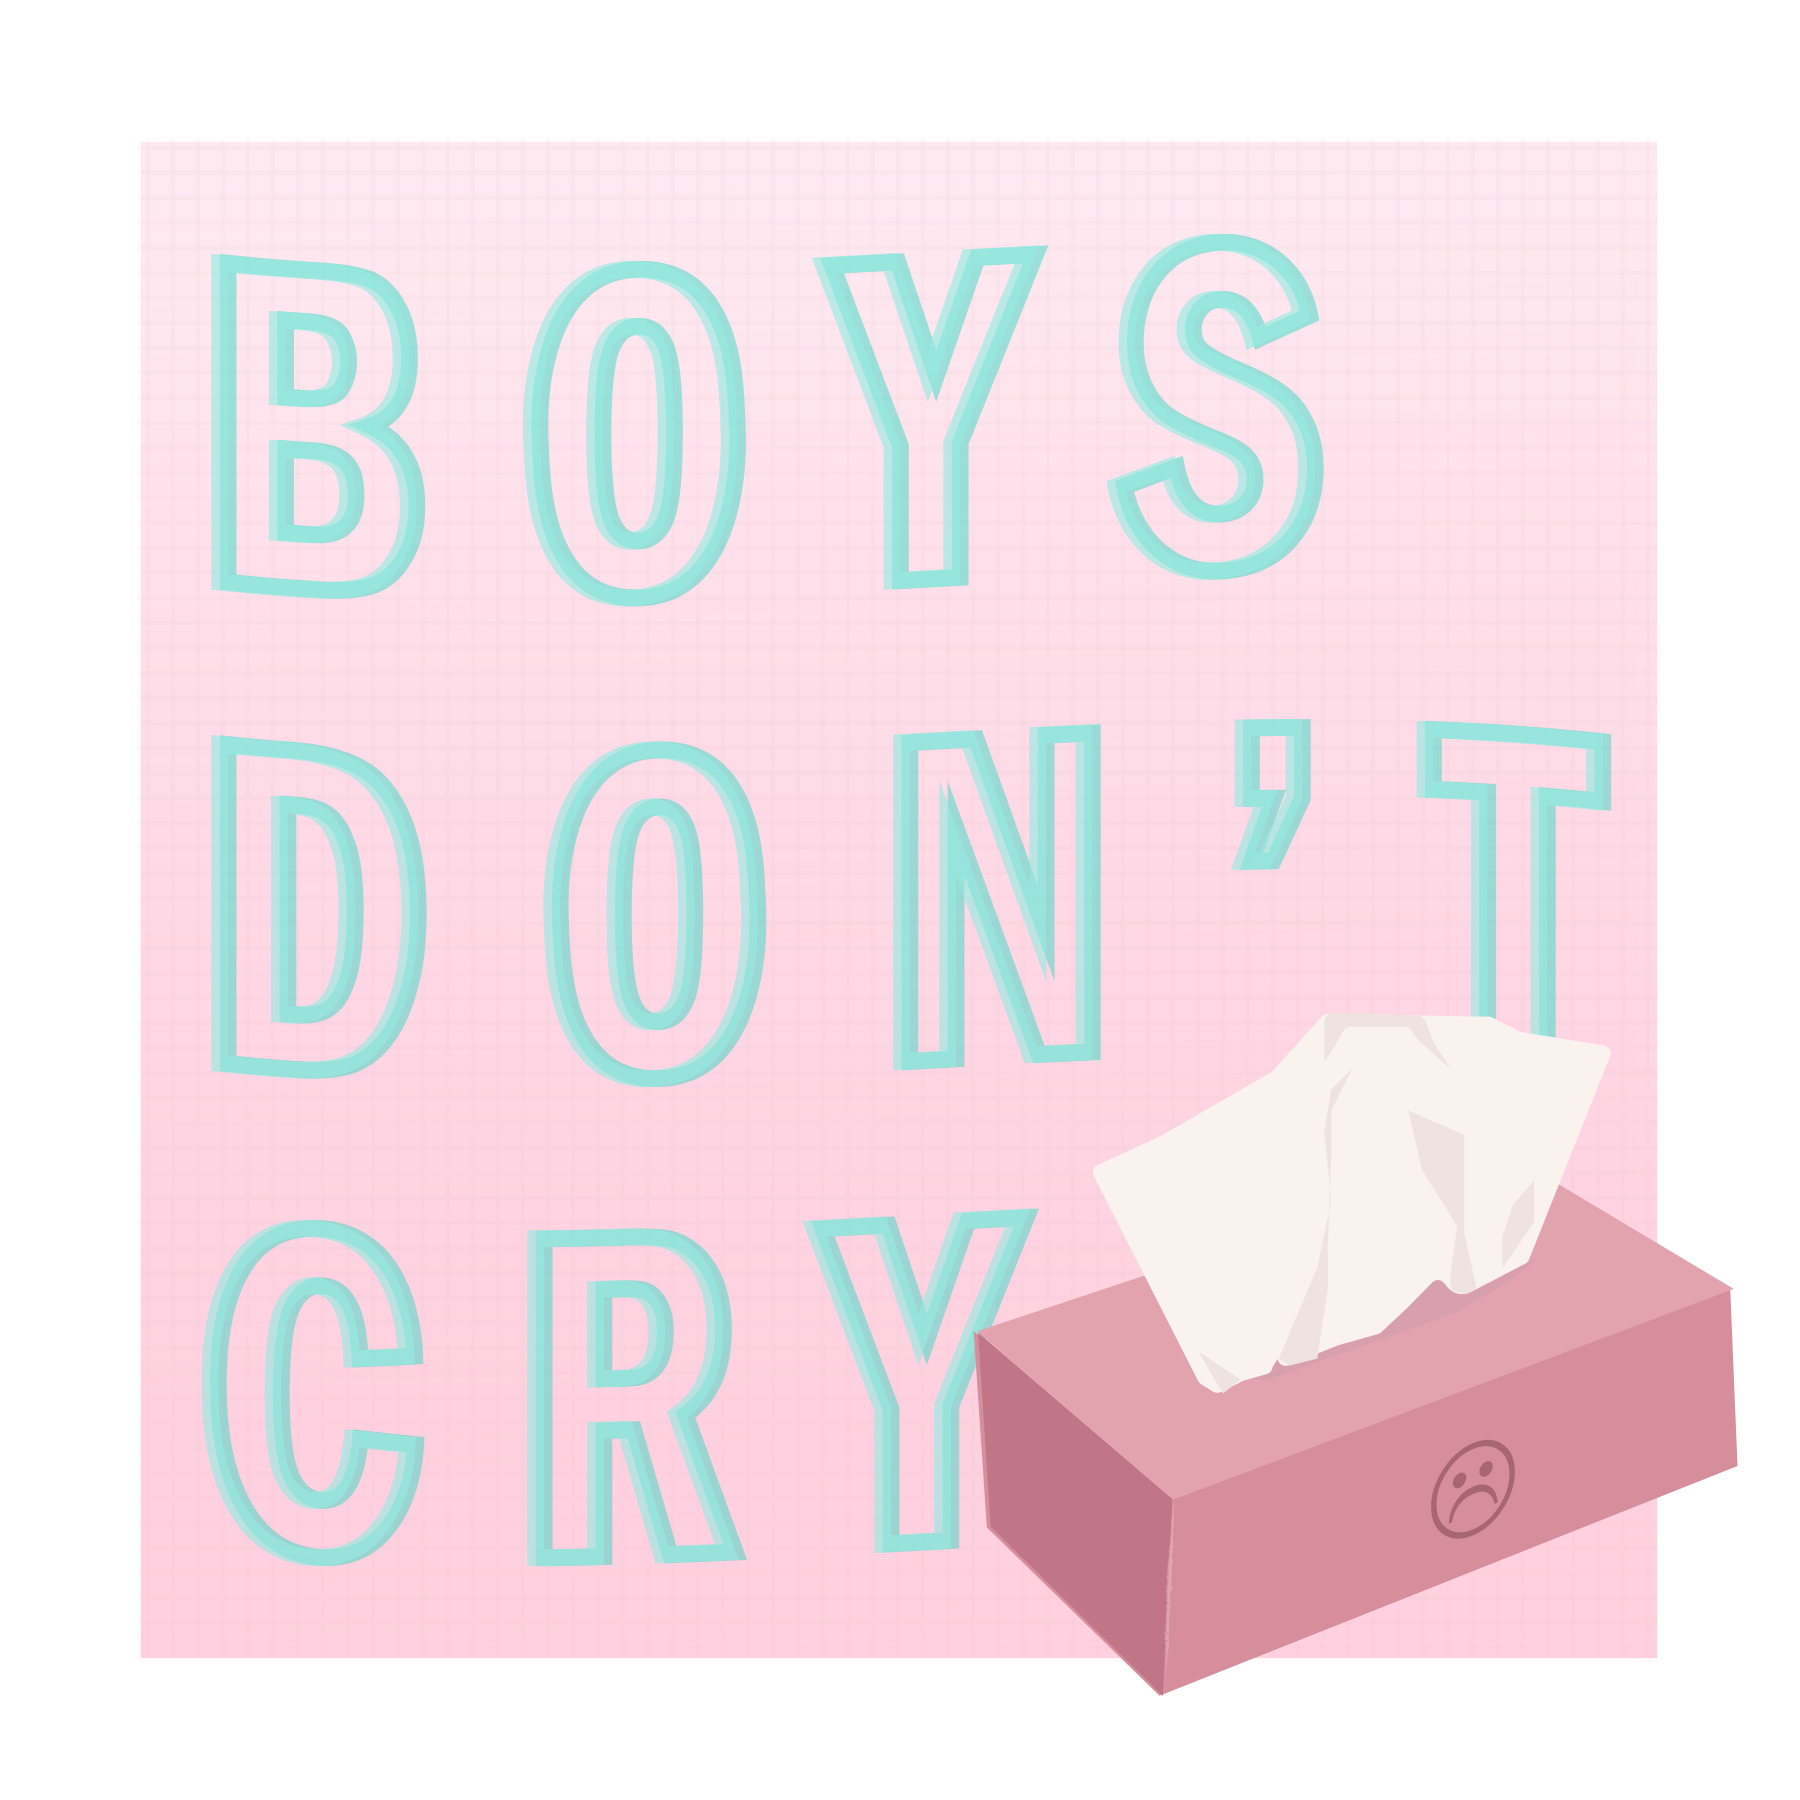 #EBSoundtrack Weekly Playlist 7 - "Boys Dont Cry" card image